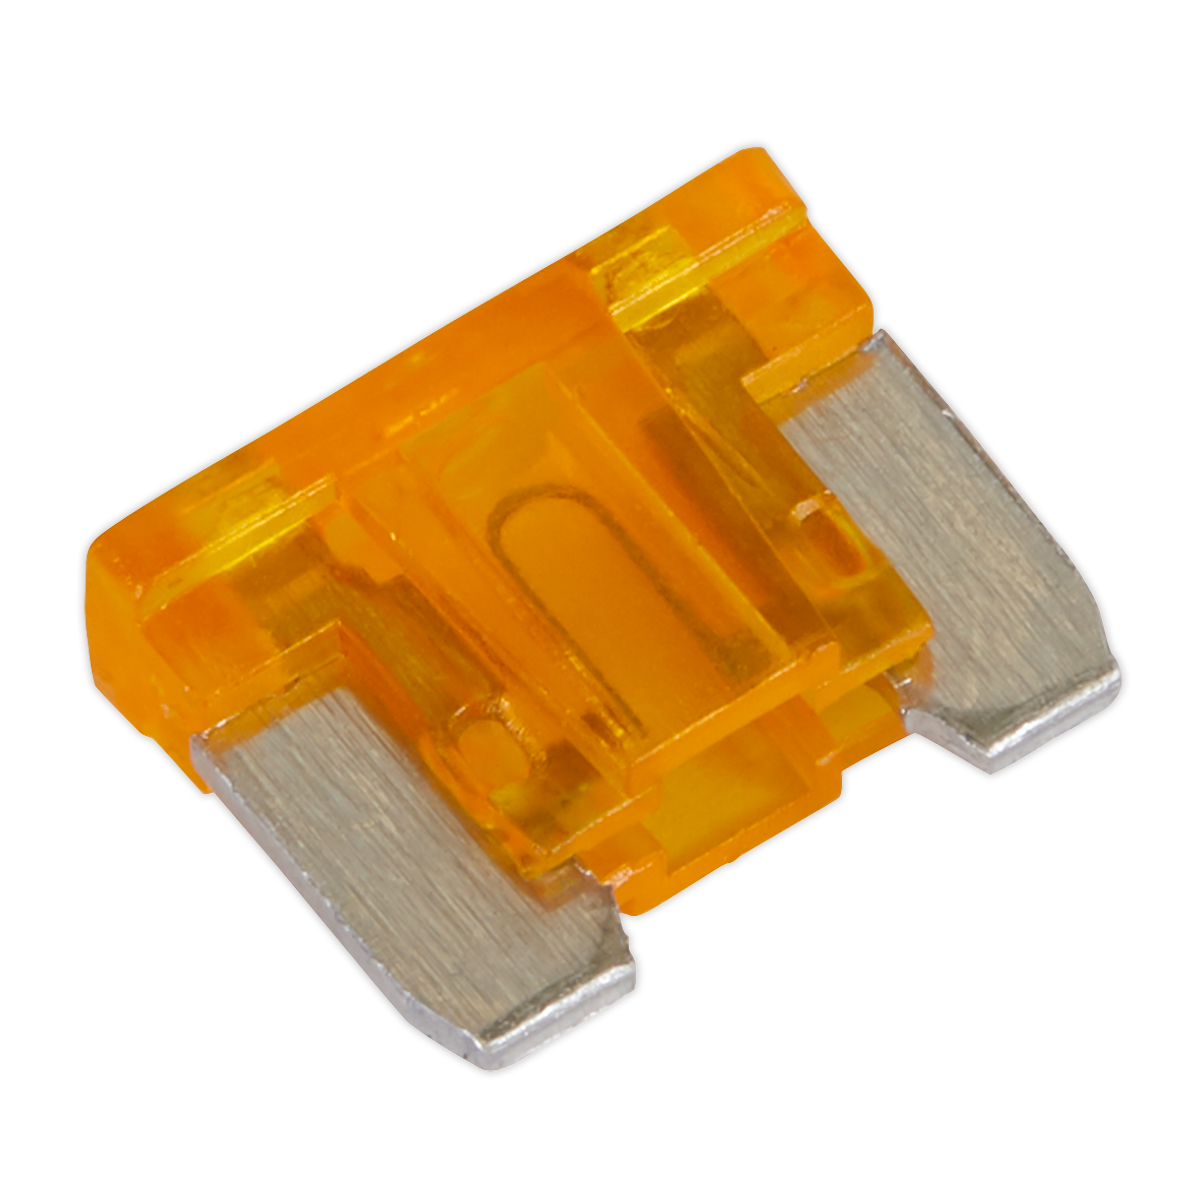 Automotive MICRO Blade Fuse 5A - Pack of 50 - MIBF5 - Farming Parts